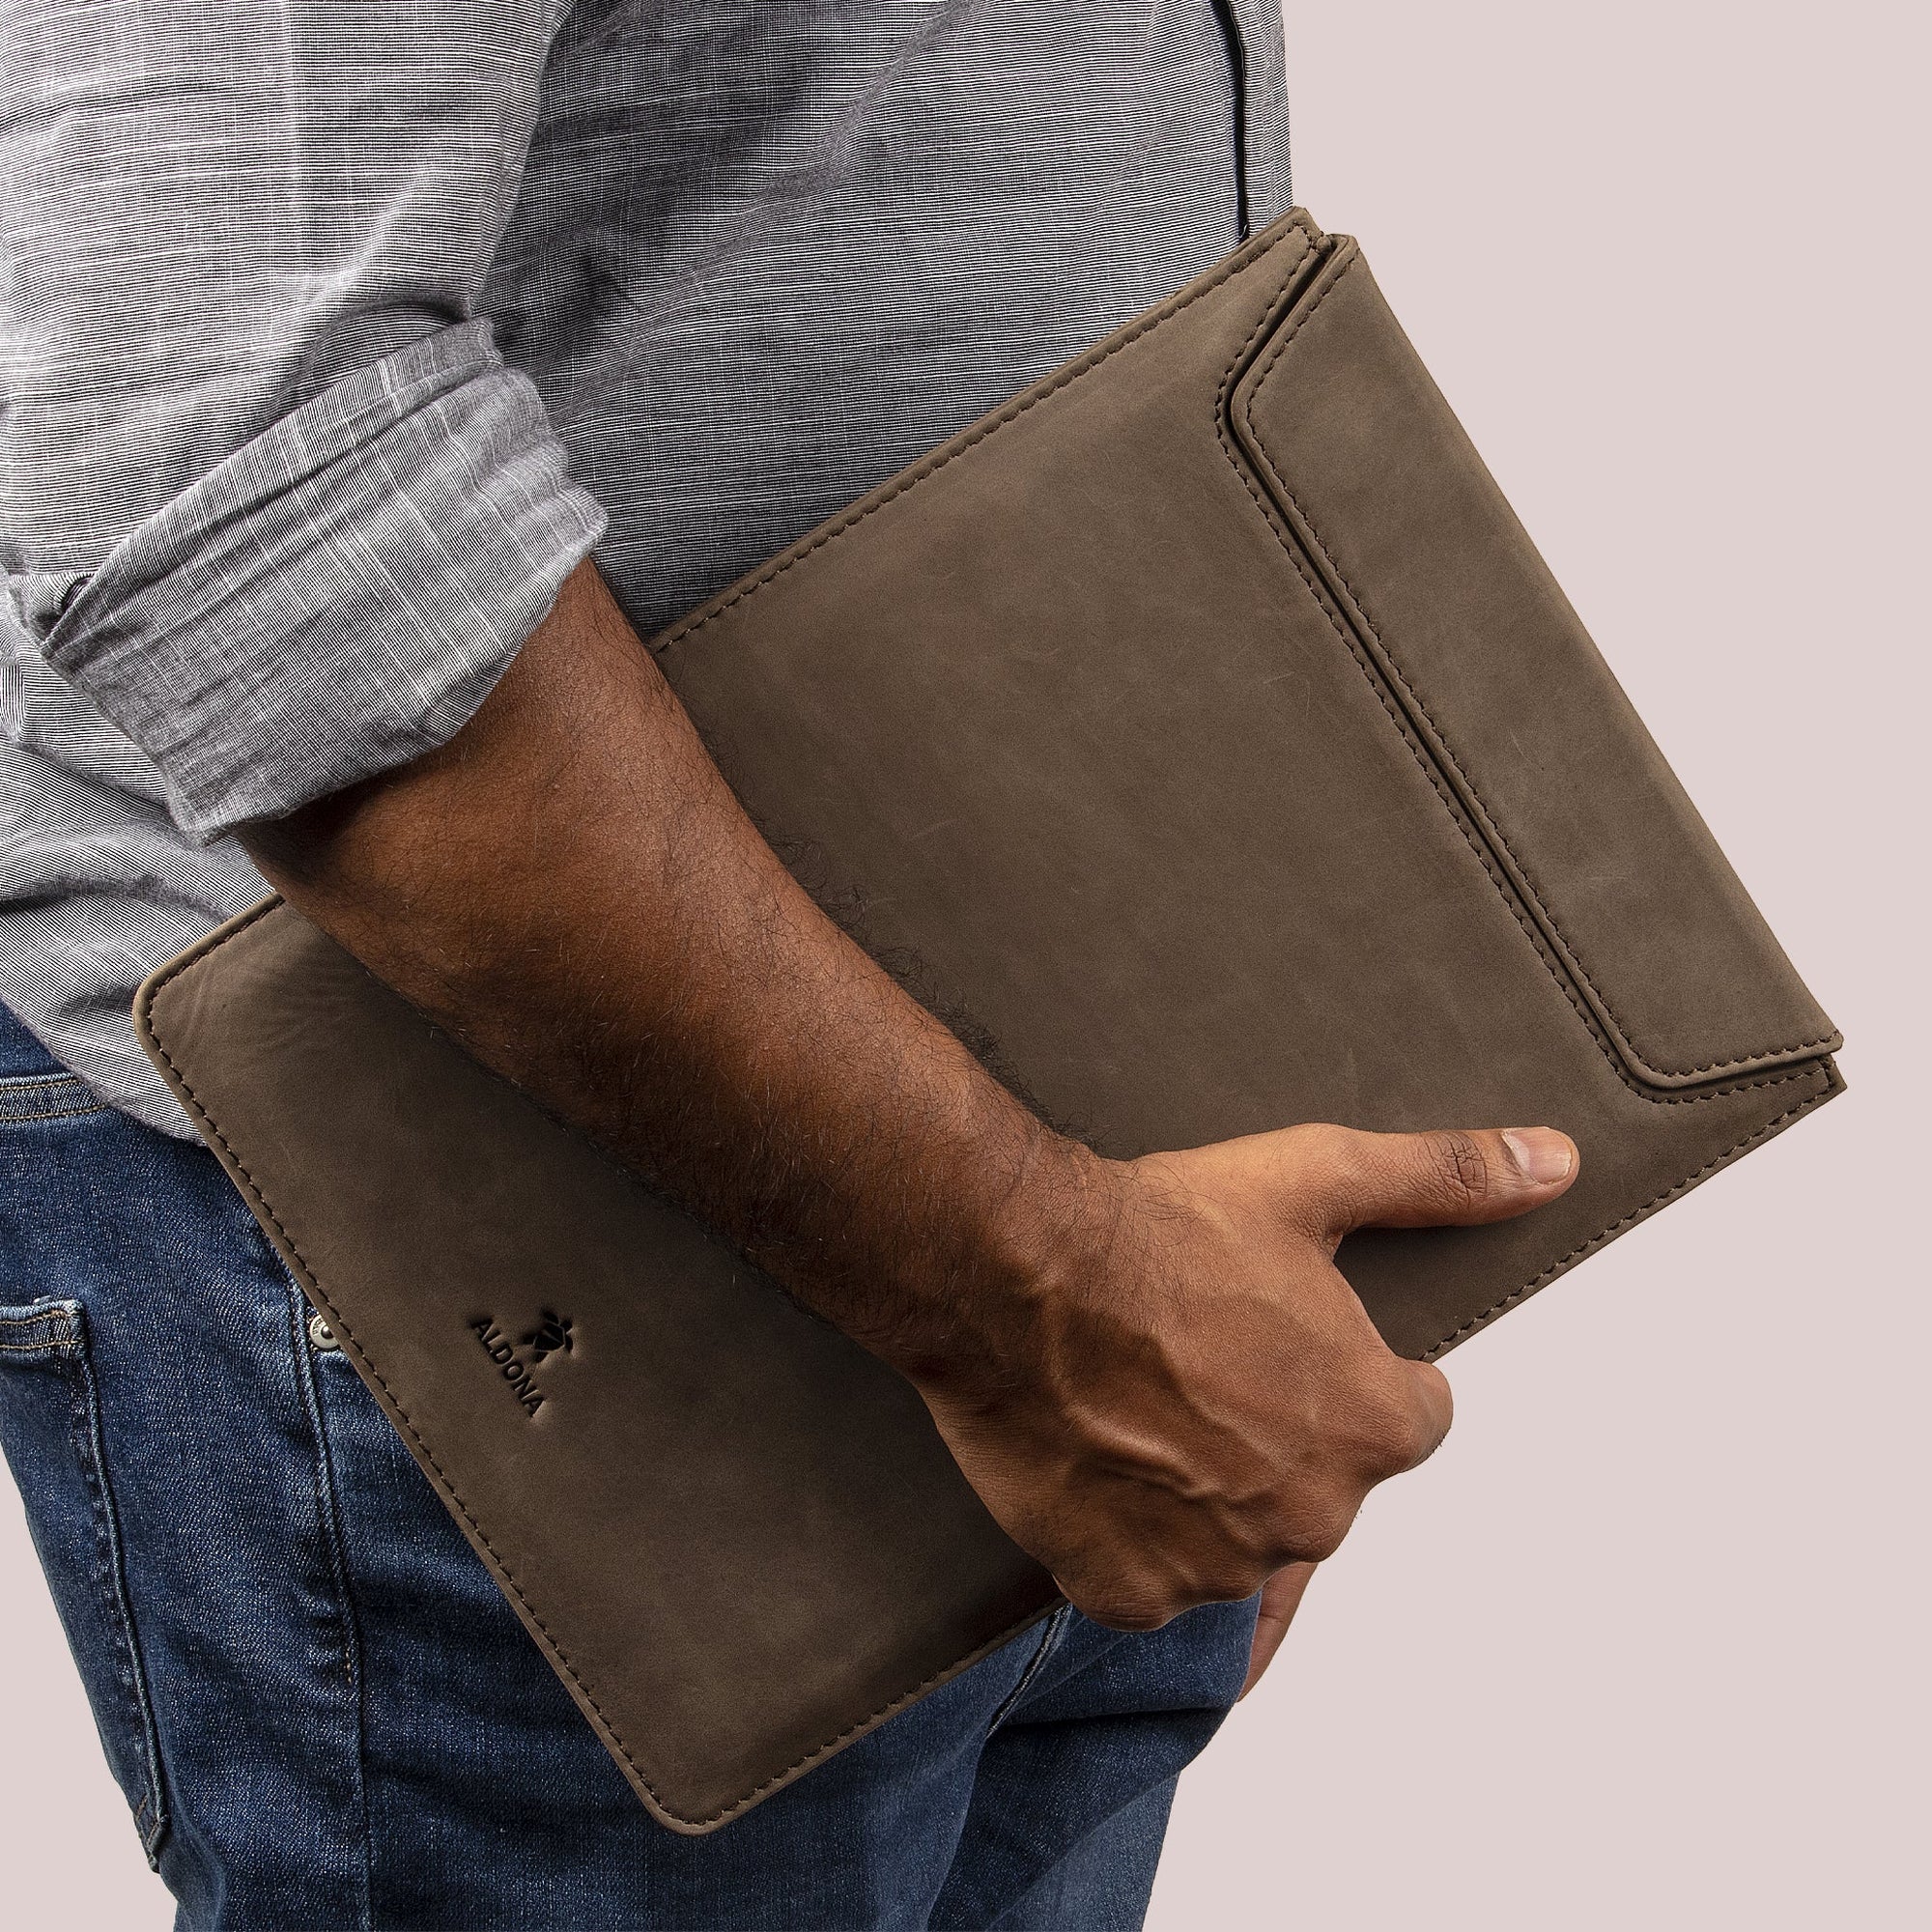 MacBook Cases for Office Professionals